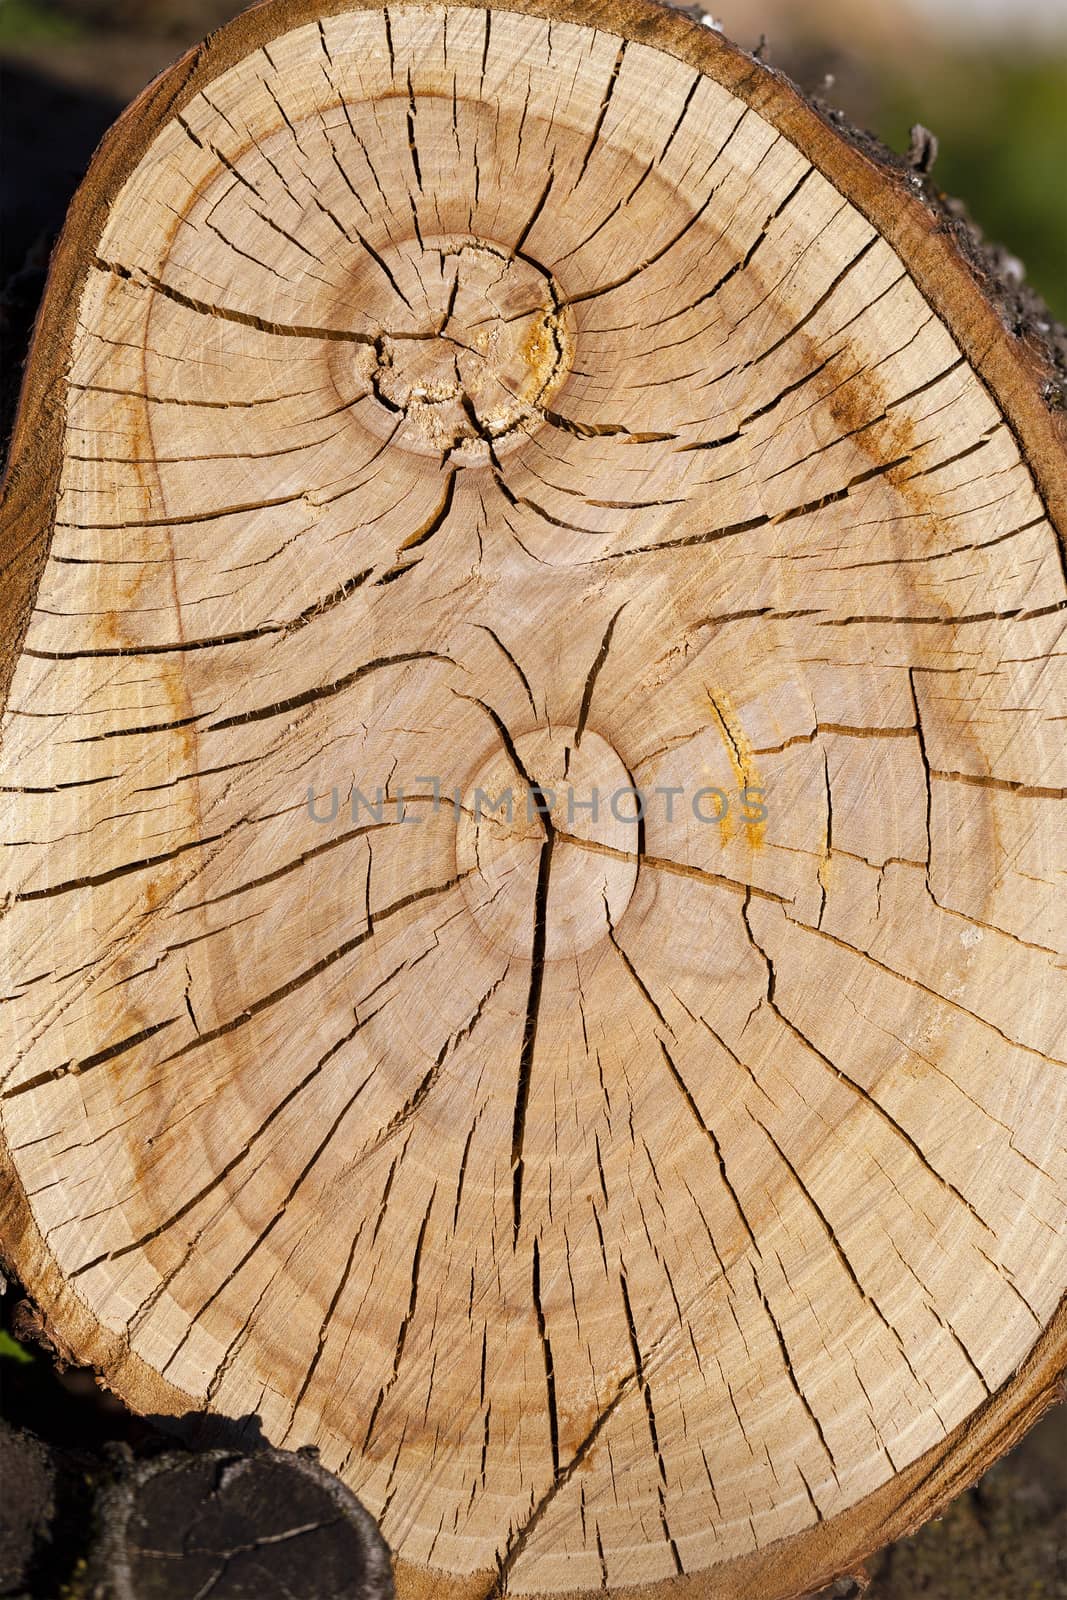   the sawn tree photographed by a close up